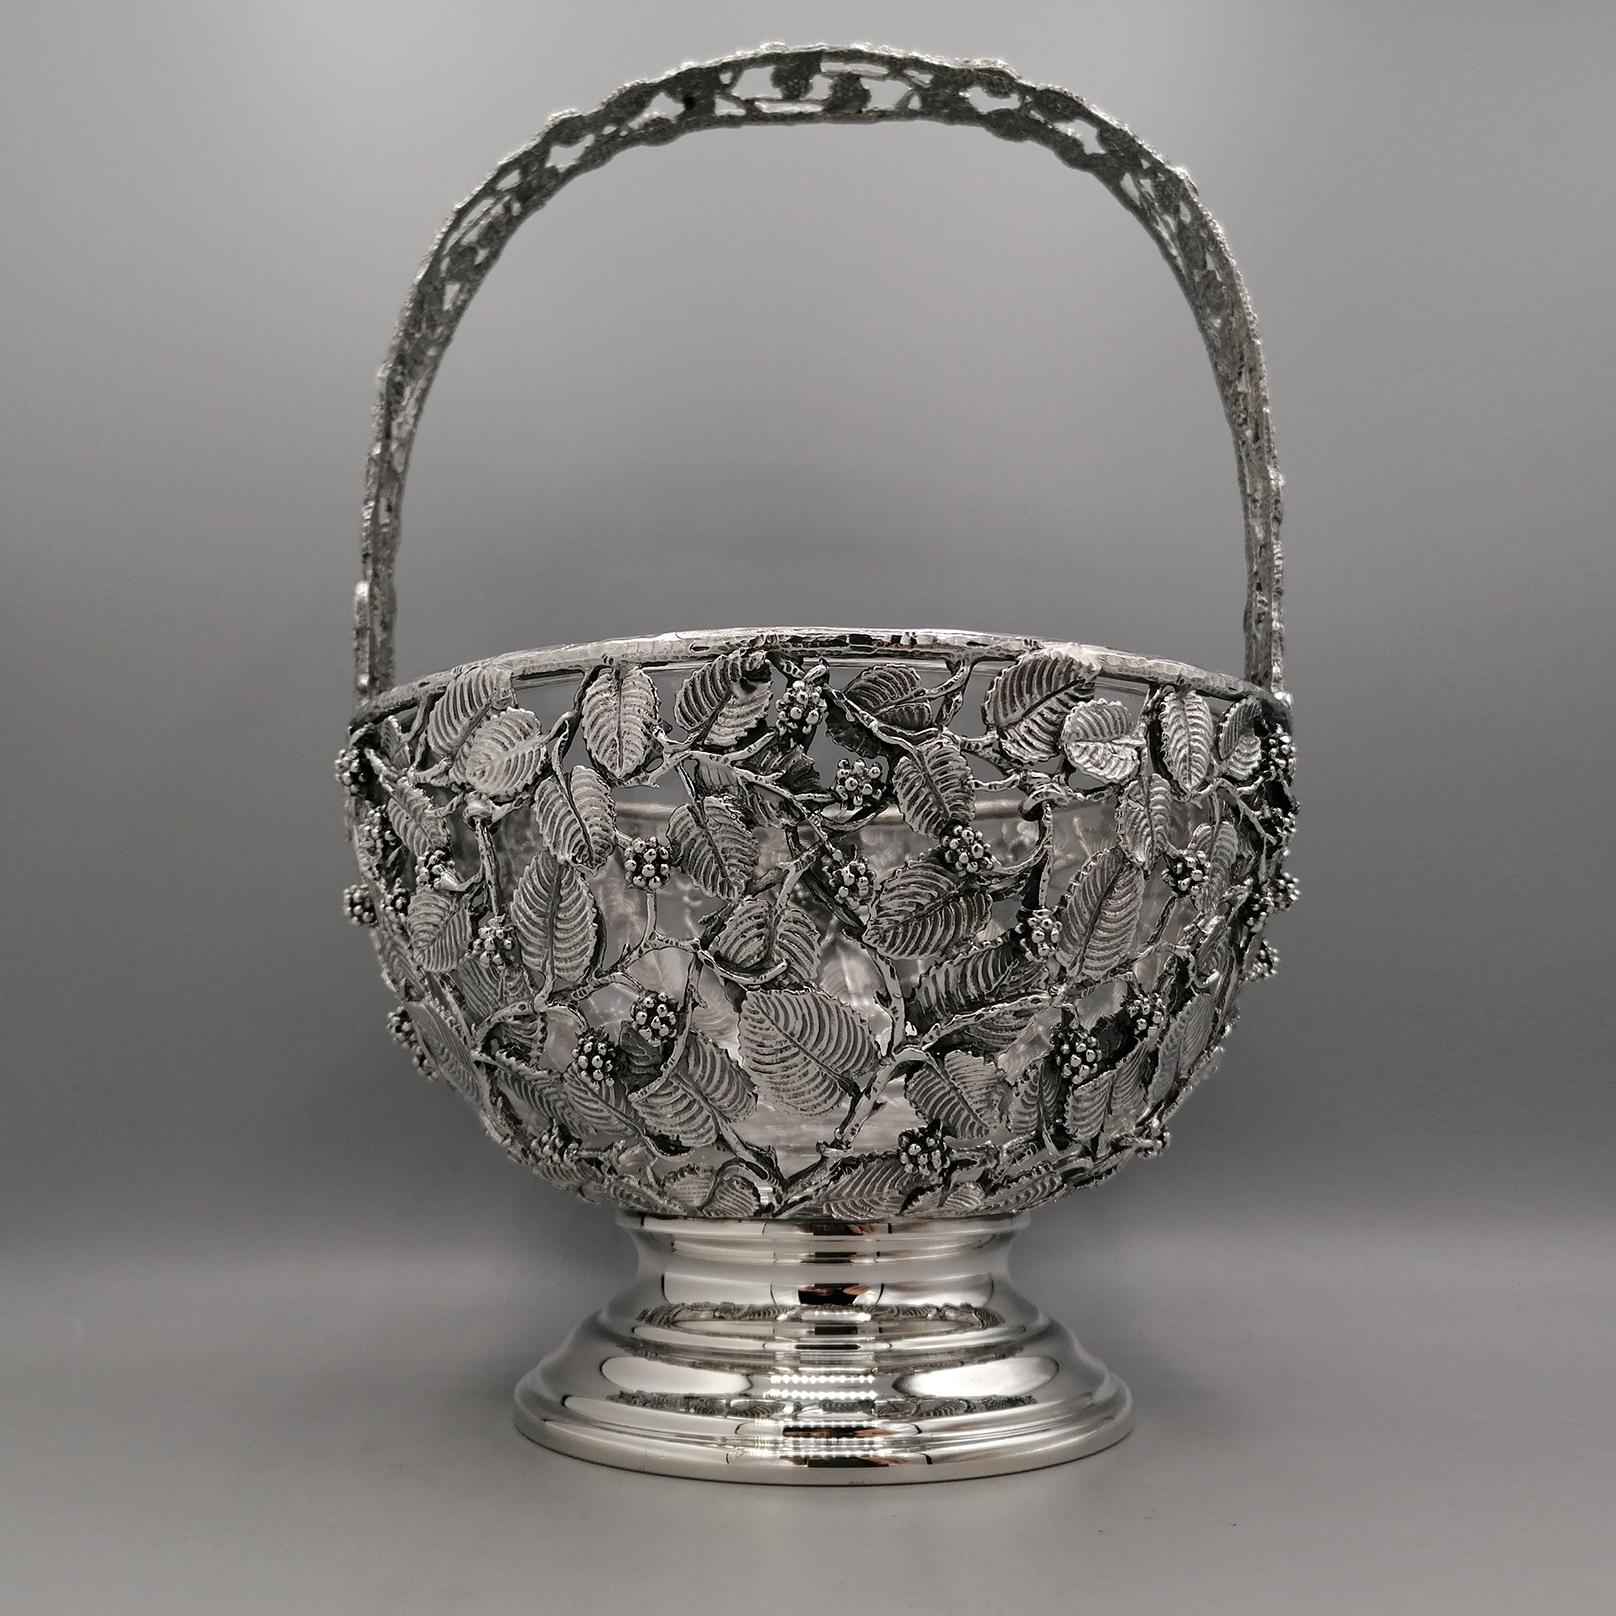 Forged 20th Century Italian Basket  sterling silver pierced with blackberries and leaves.  For Sale